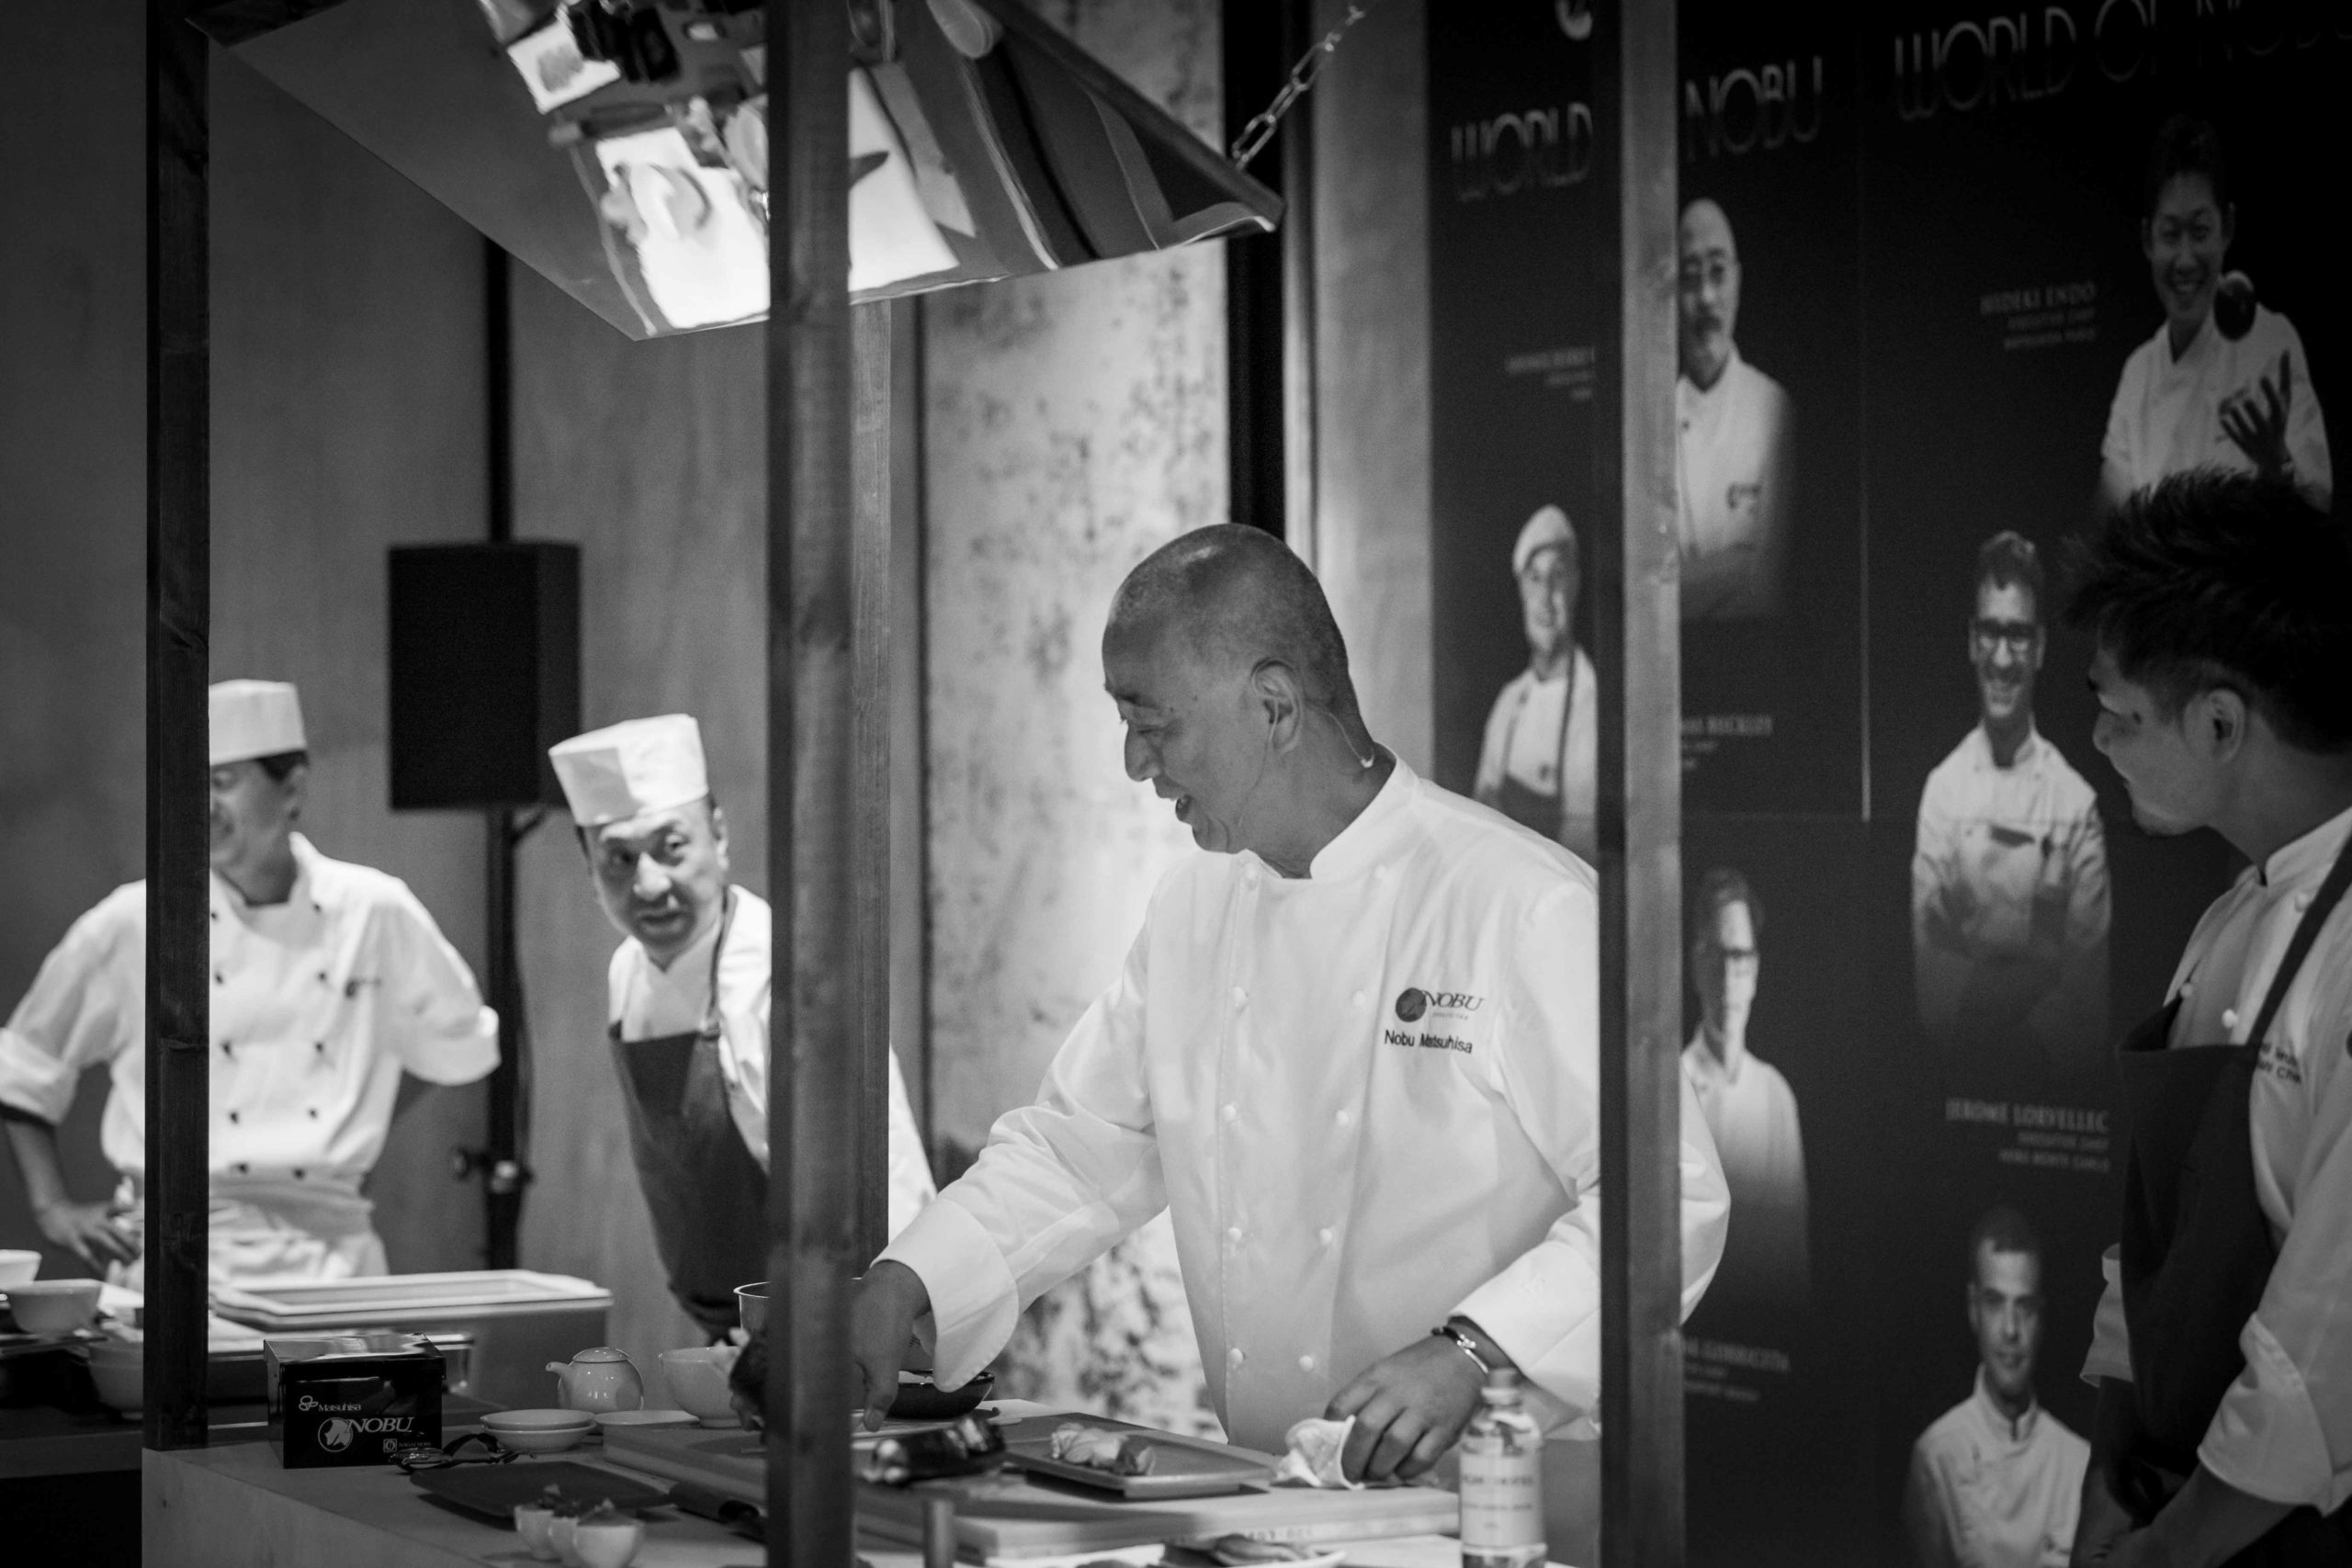 Black and white image of Nobu chef and staff members preparing meals